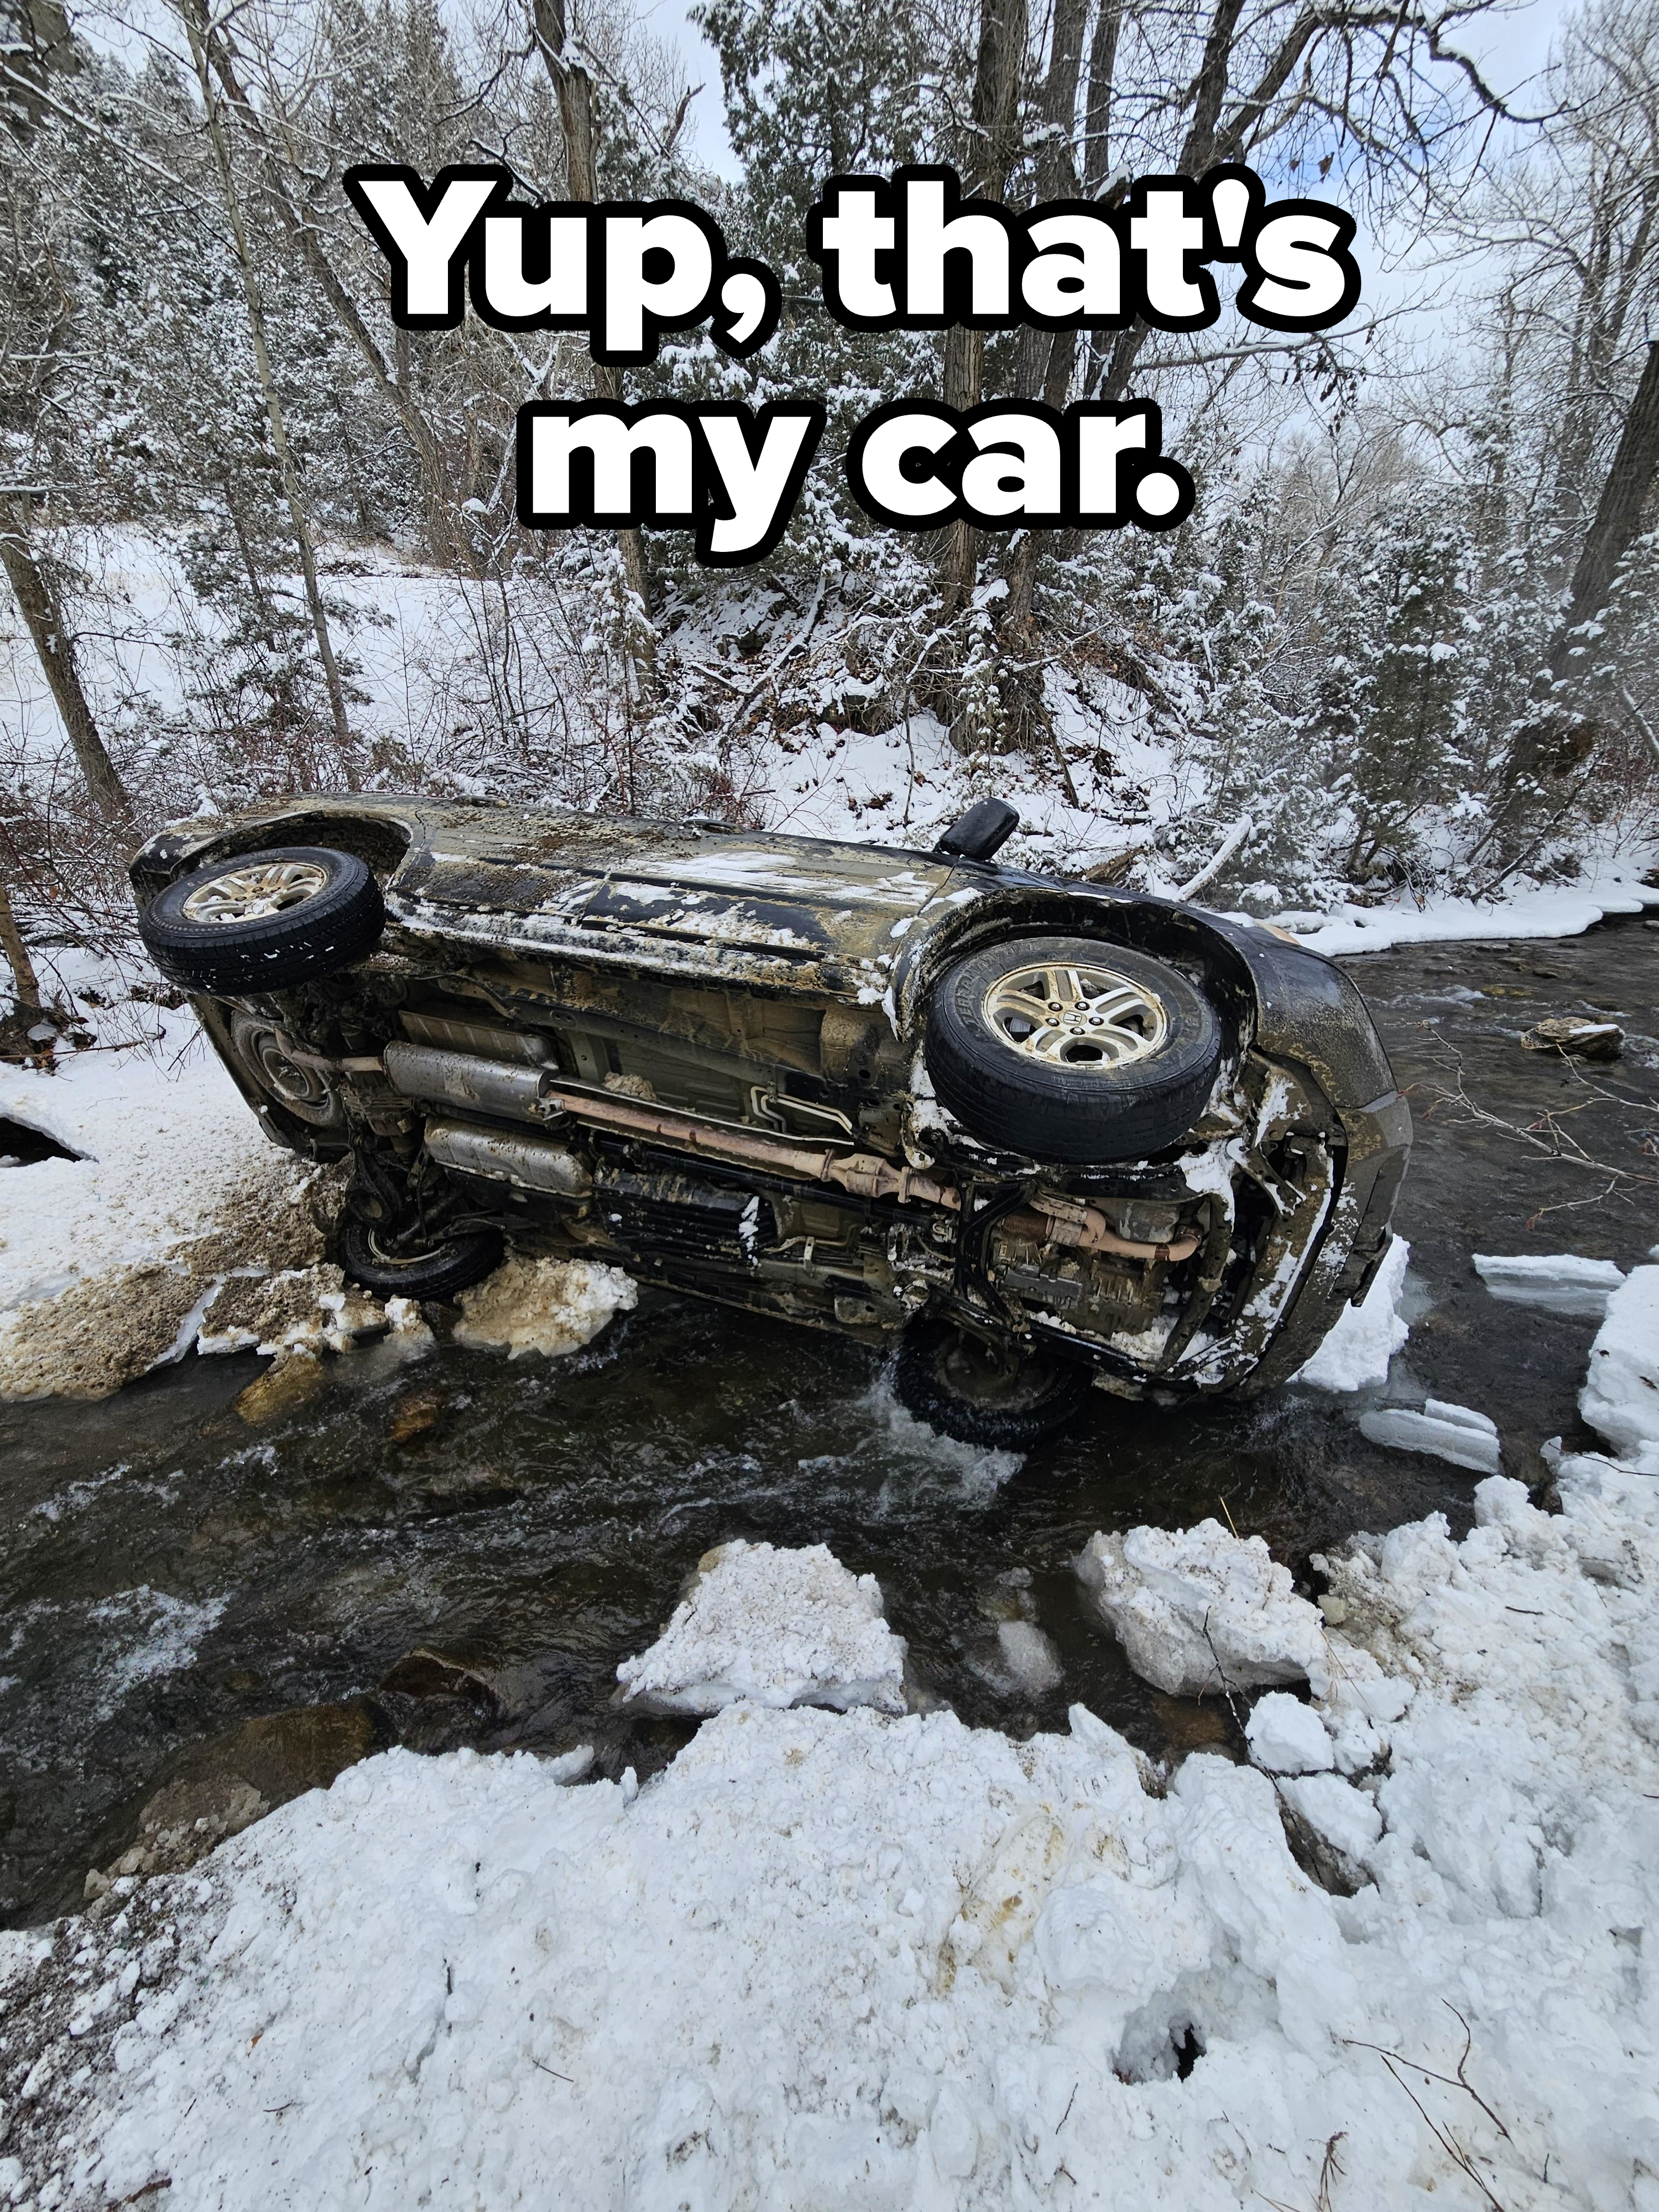 Overturned car in a snowy creek with trees in the background